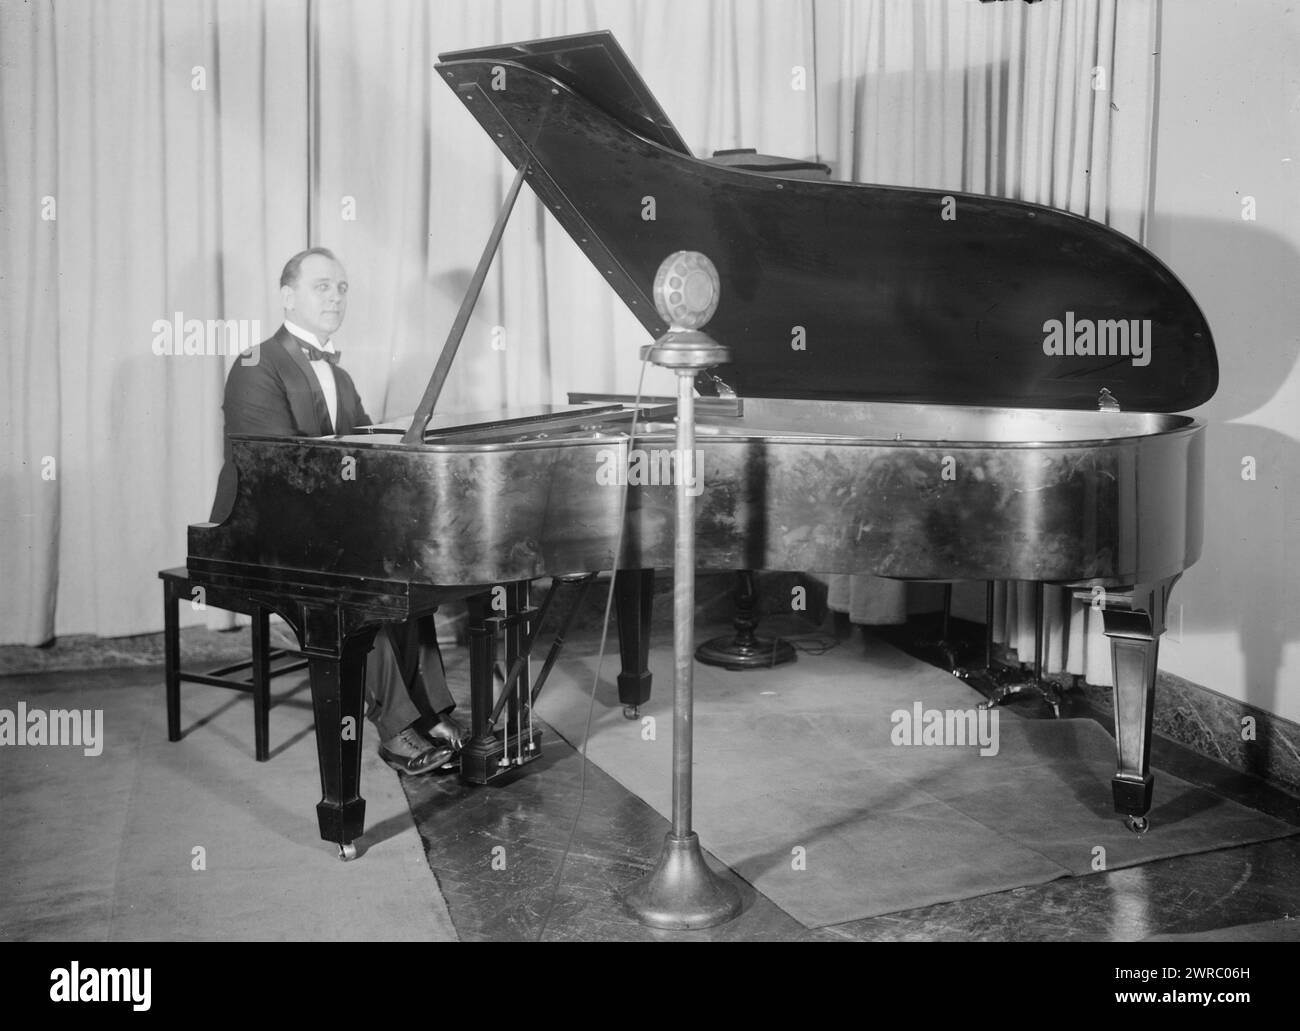 LaForge, Photograph shows Frank LaForge, American pianist, composer and arranger., 1/16/25, Glass negatives, 1 negative: glass Stock Photo